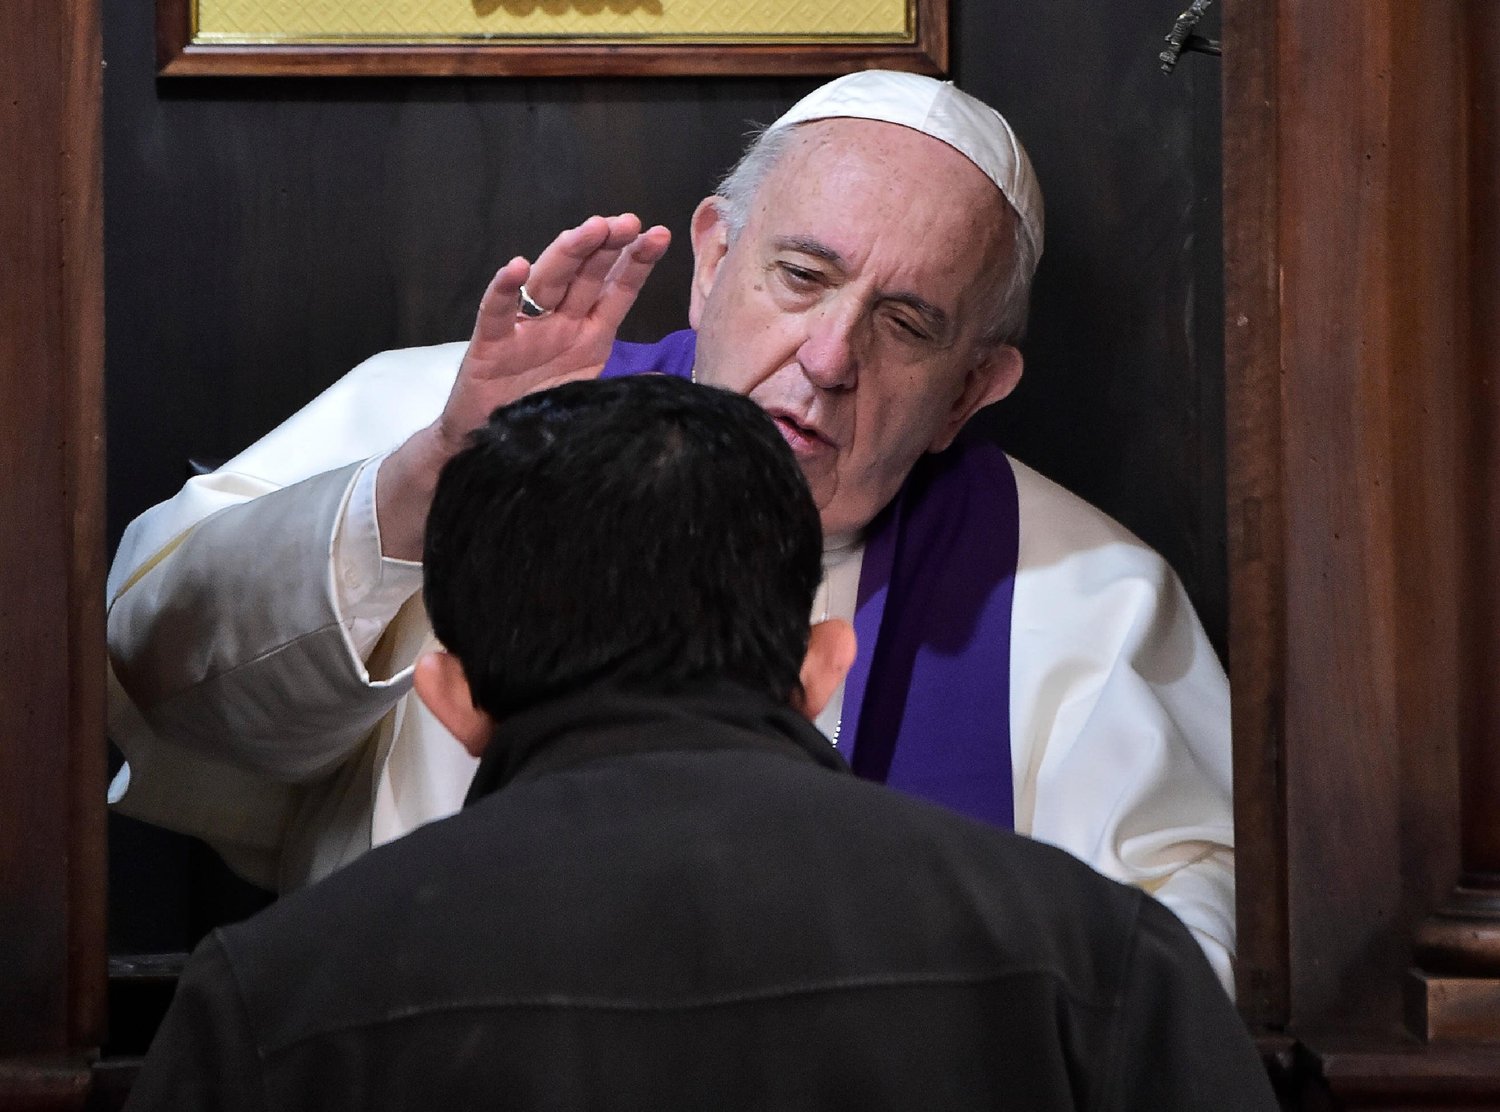 Pope Francis hears the confession of a priest at the Basilica of St. John Lateran in Rome in this March 7, 2019, file photo.